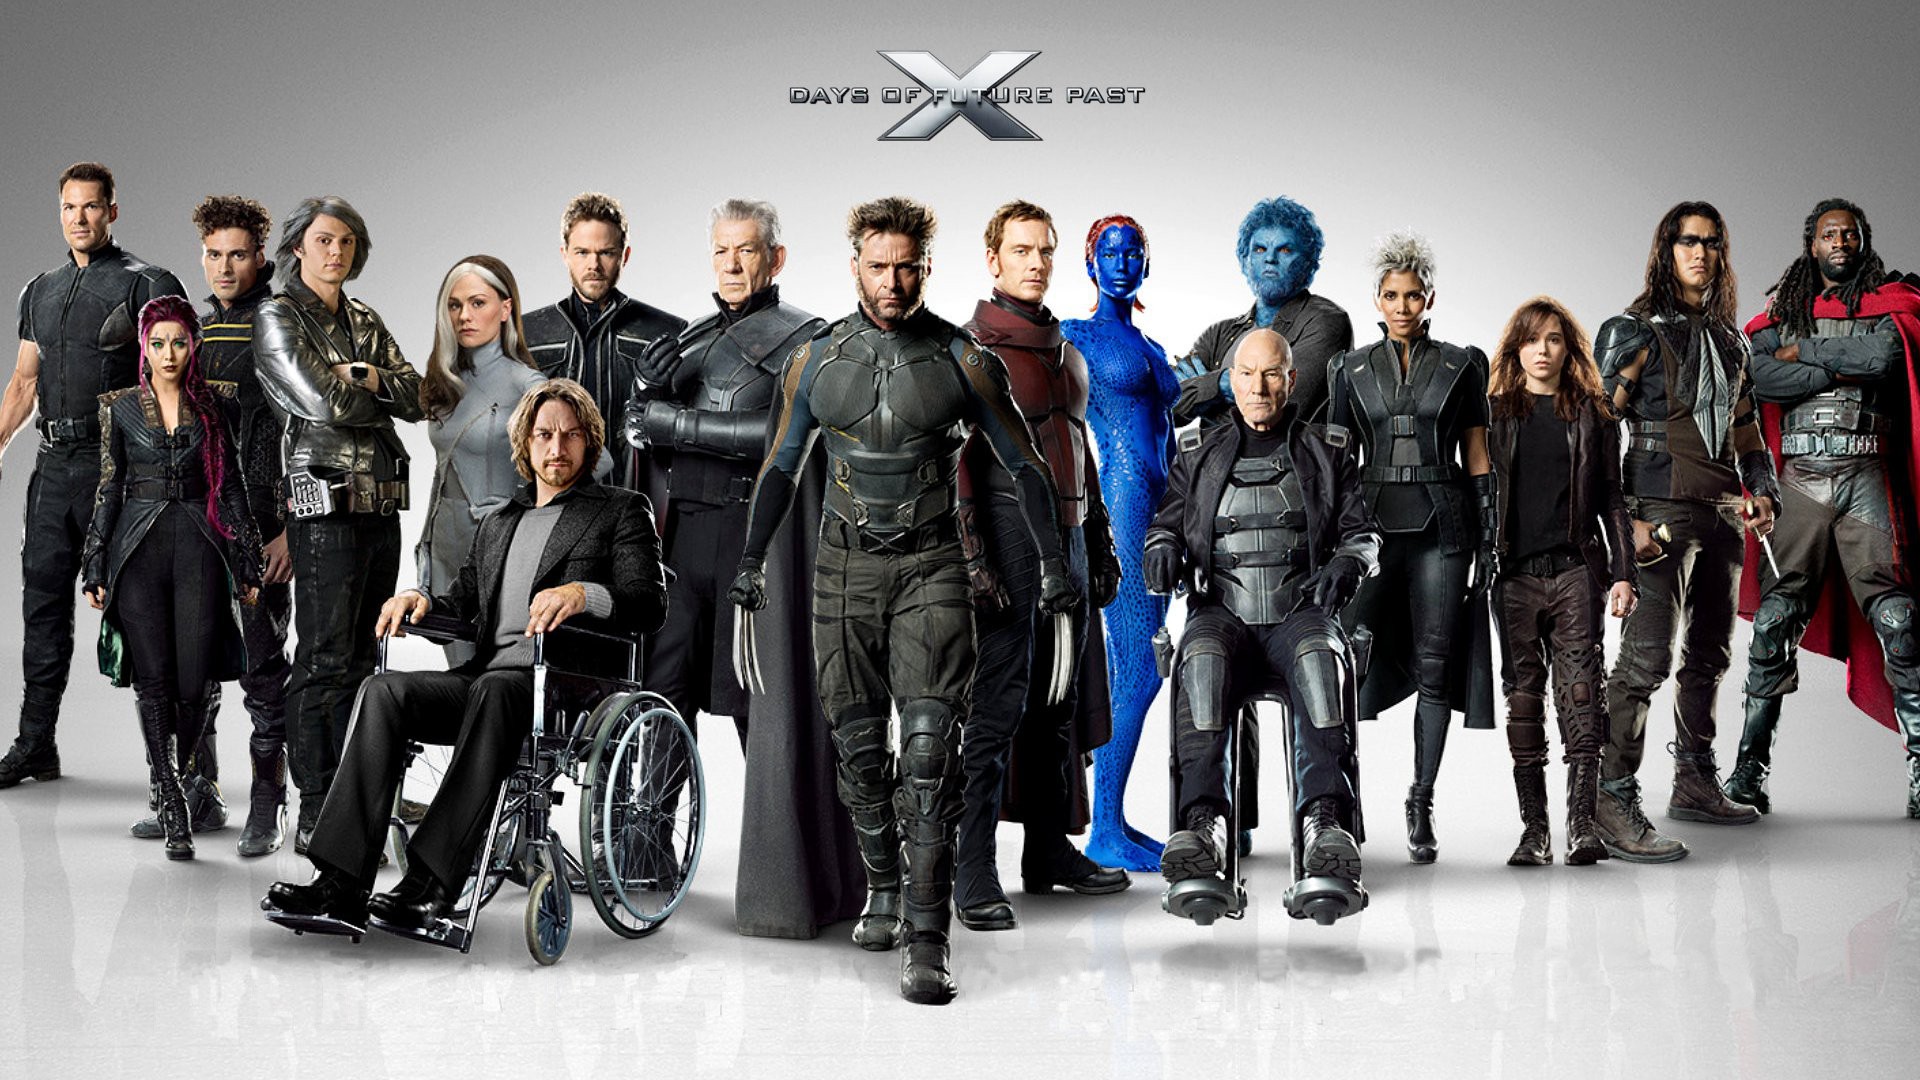 People 1920x1080 X-Men X-Men: Days of Future Past Wolverine Magneto Charles Xavier Beast (character) Ian McKellen science fiction movies Mystique Marvel Comics Rogue (character) Storm (character) Patrick Stewart Michael Fassbender James McAvoy Hugh Jackman Halle Berry Kitty Pryde Elliot Page simple background